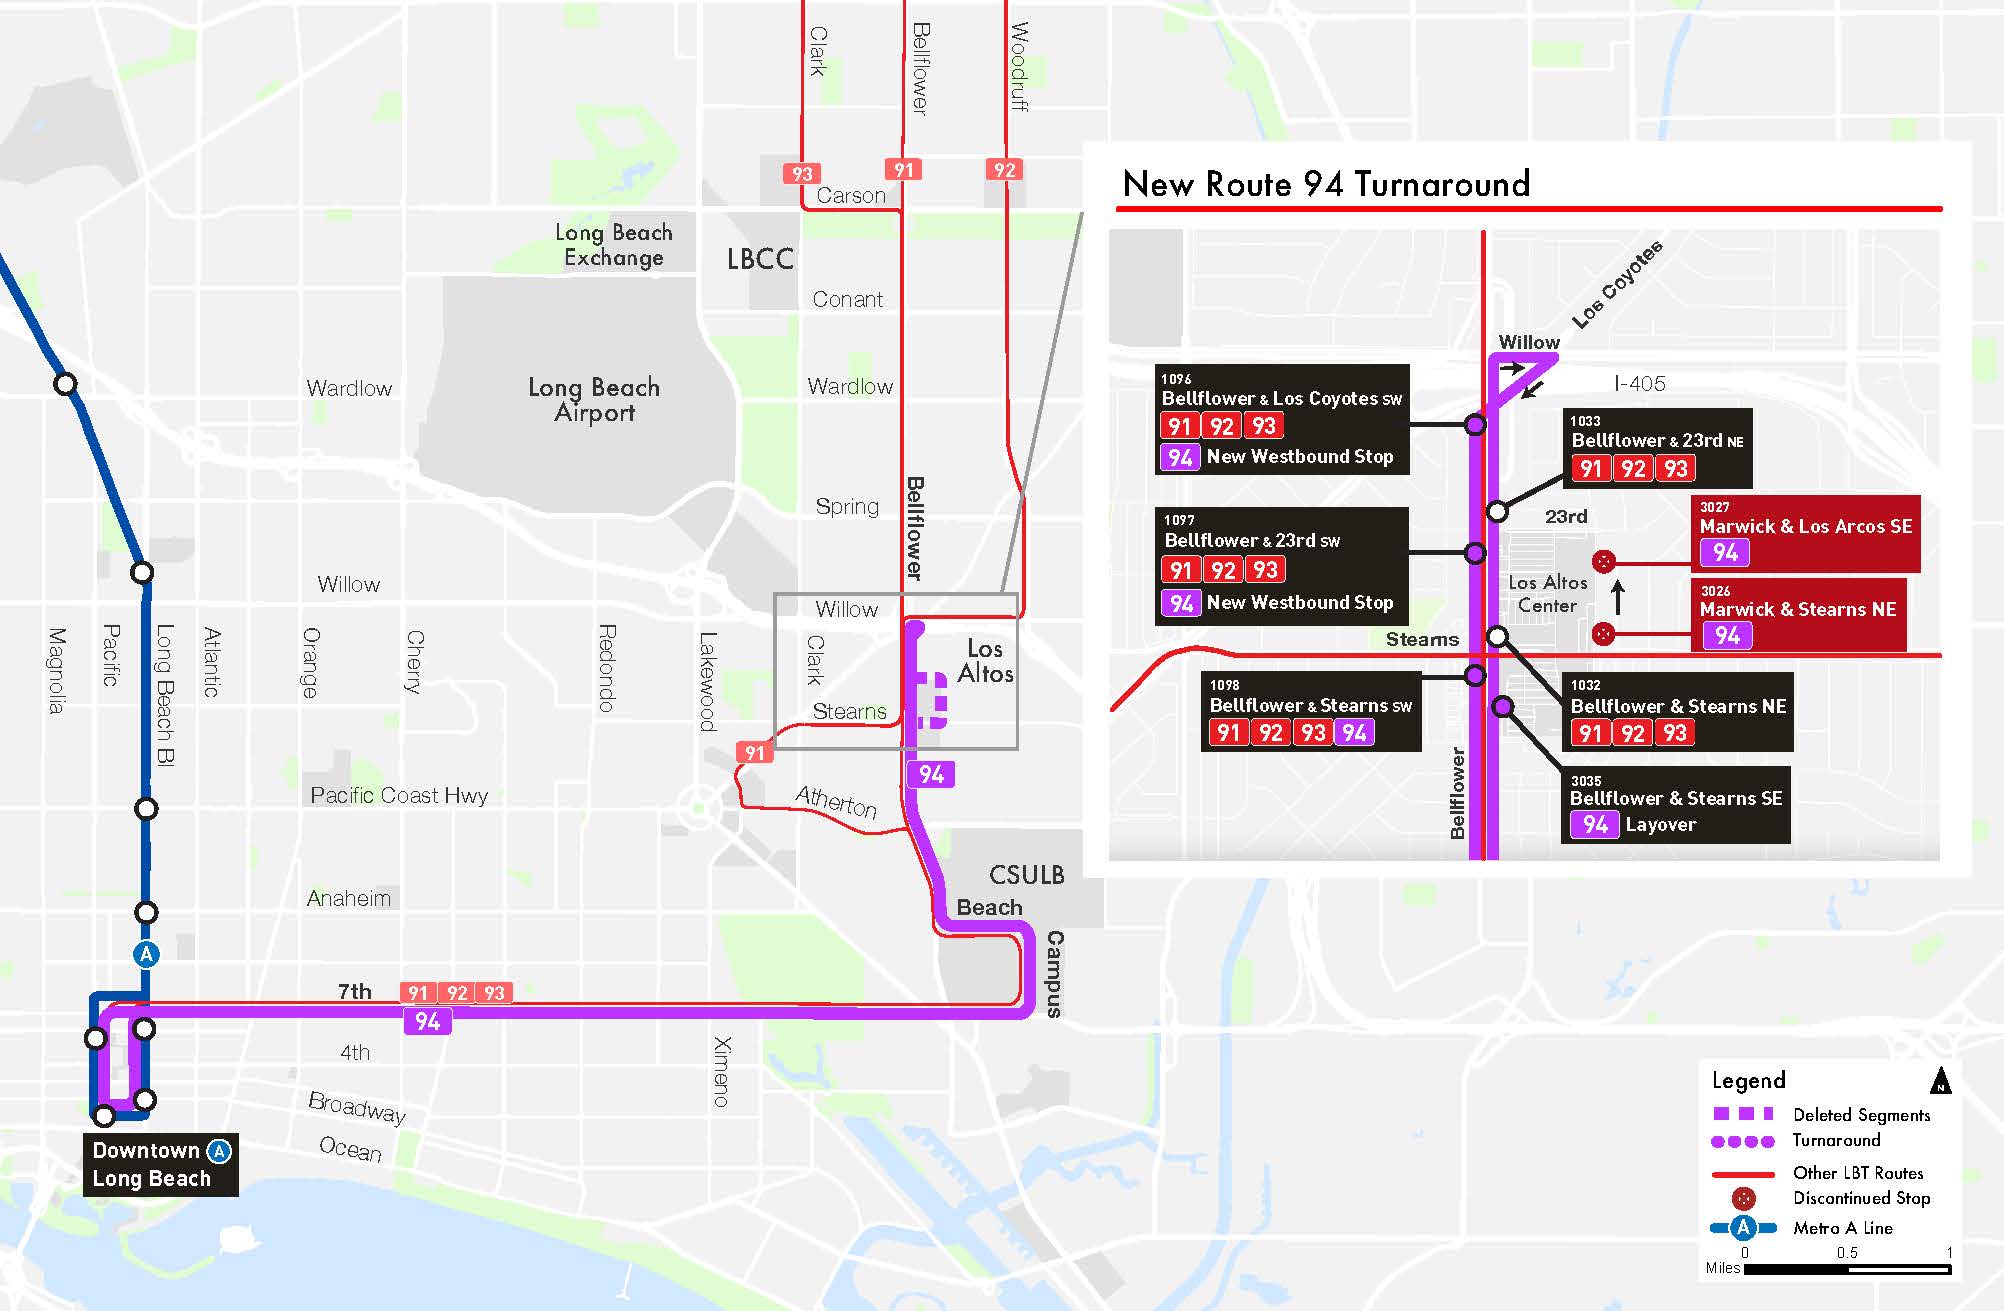 How to get to Afterlife in Long Beach by Bus?